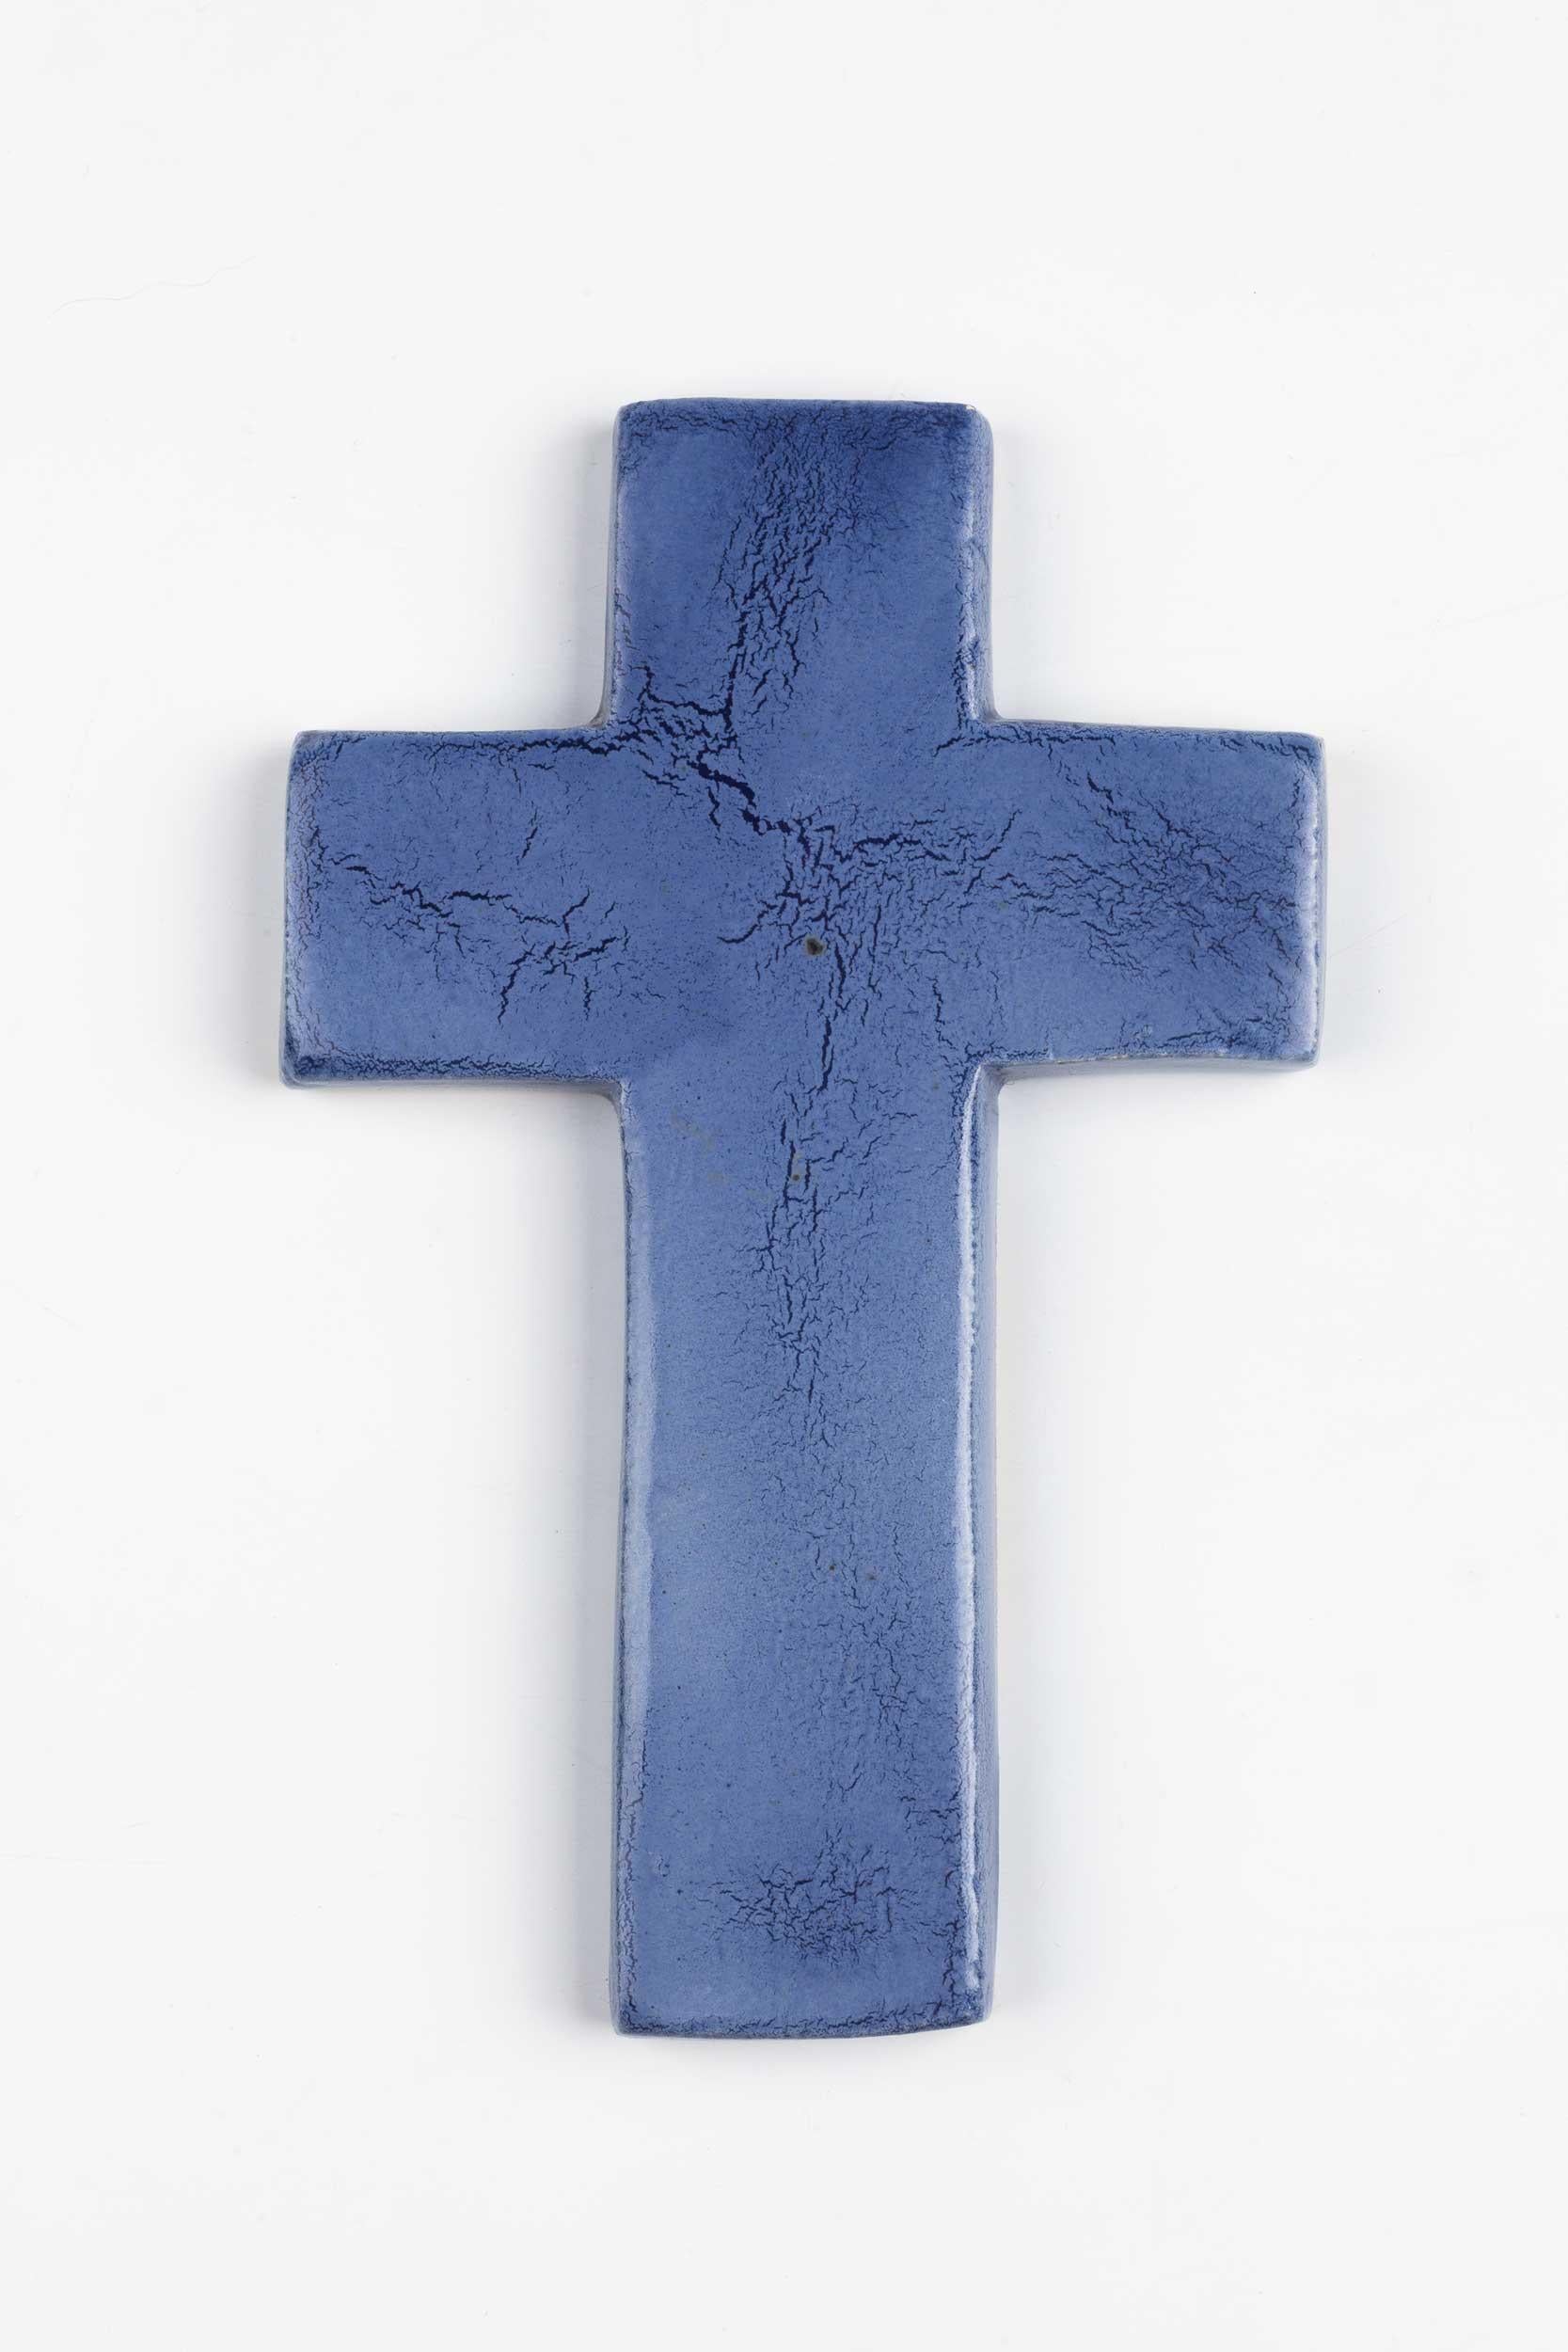 Midcentury European Wall Cross, Glazed Lavender, 1980s In Good Condition For Sale In Chicago, IL